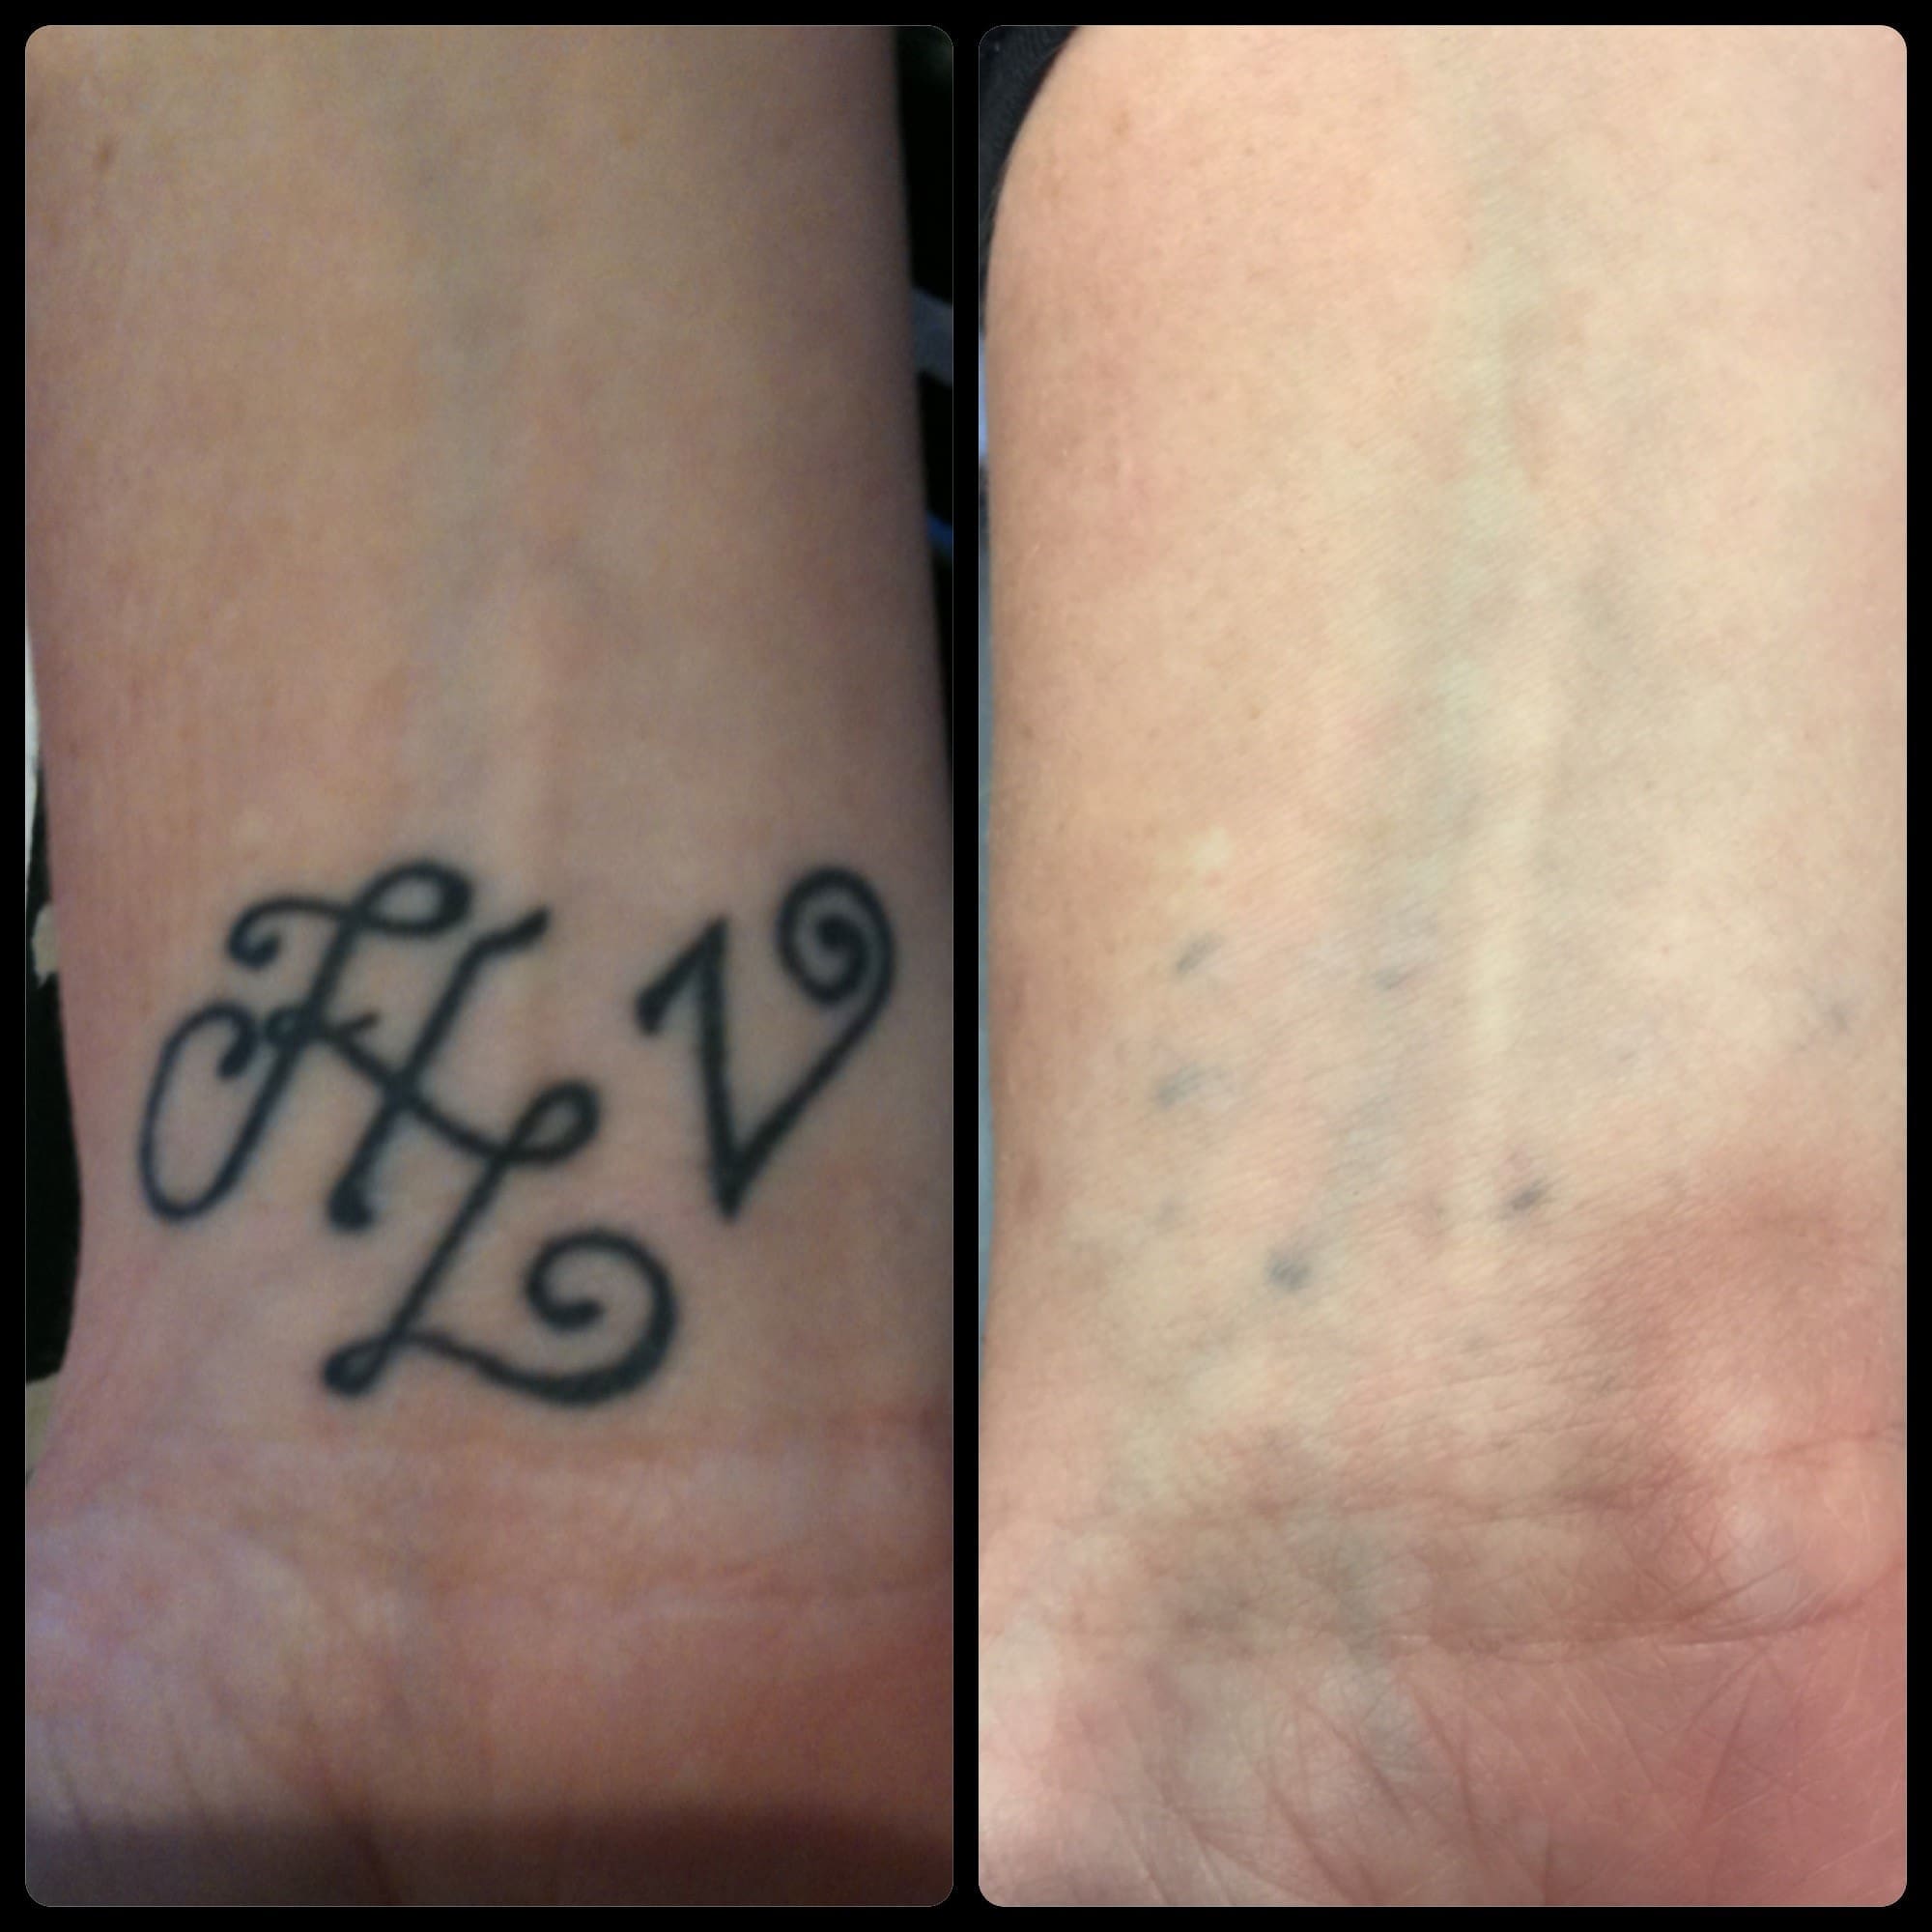 before and after image of an Arm Tattoo after treatment using The Polaris RUBY 694 Q-Switched Laser